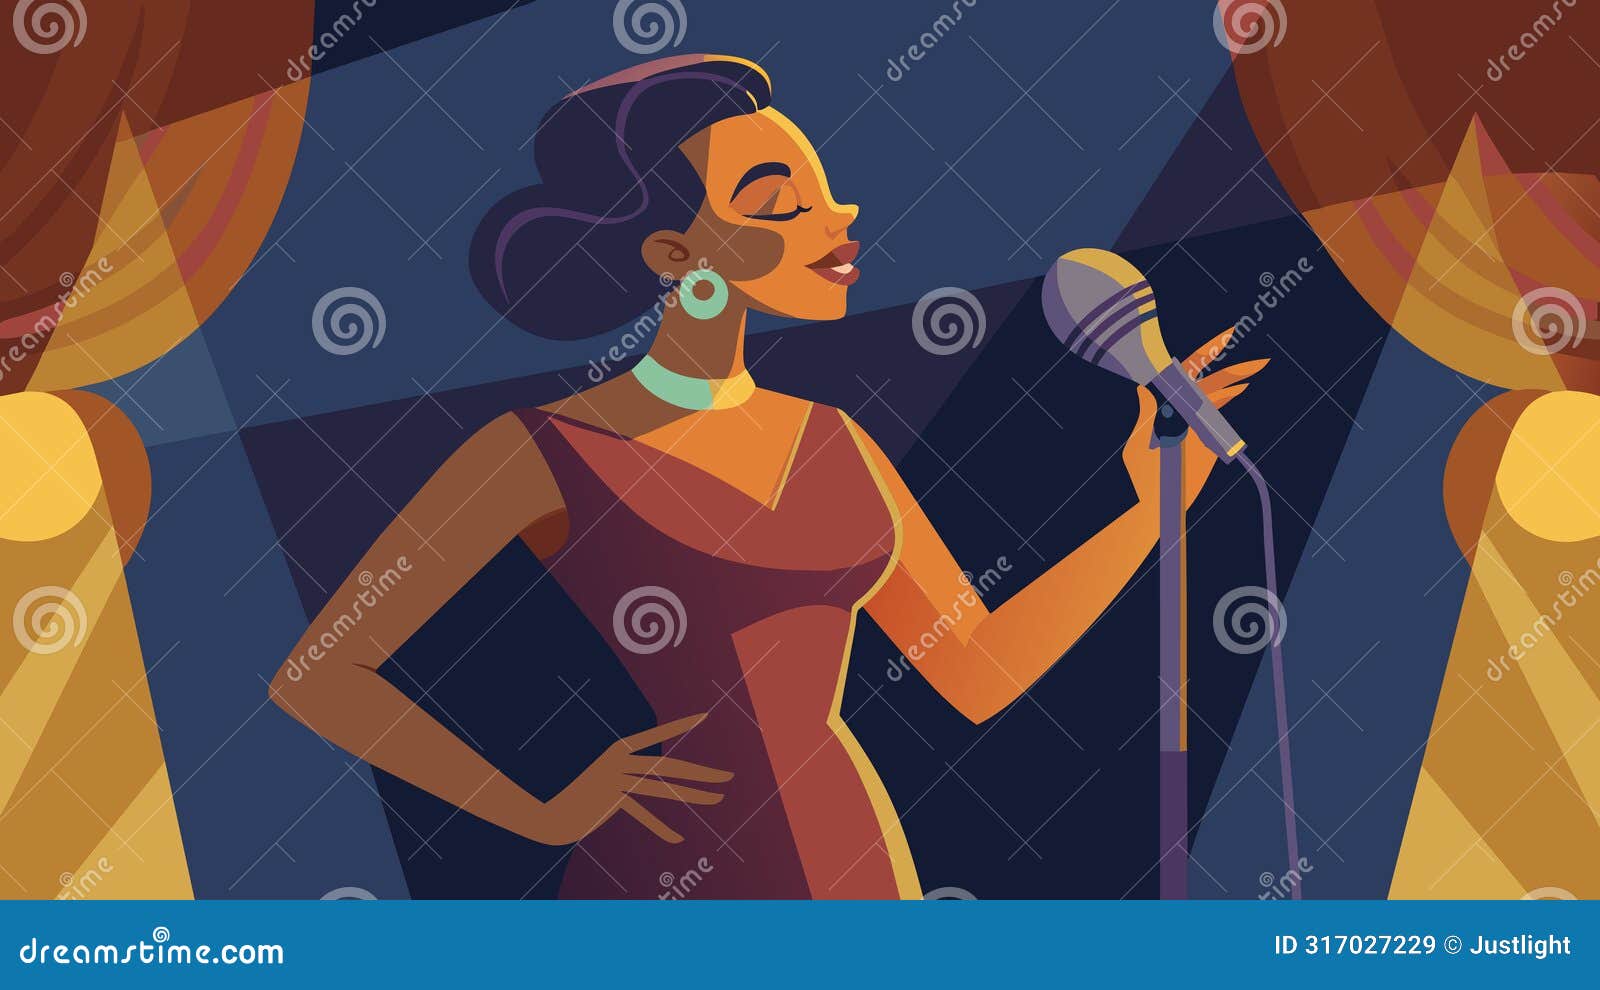 the smooth and vocals of a female jazz singer filled the room captivating the audience and transporting them back to the